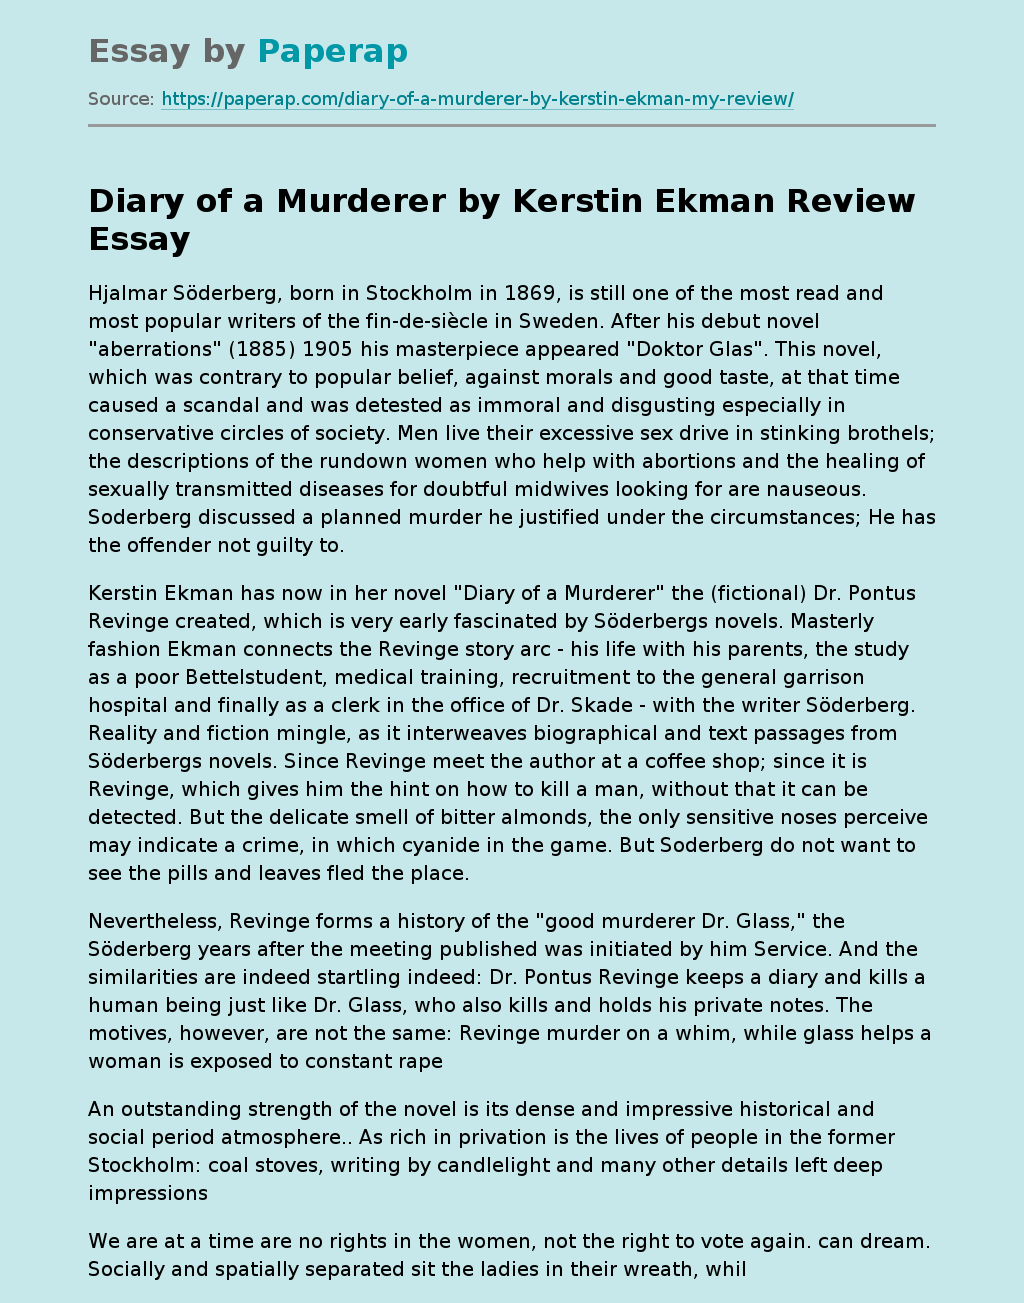 Diary of a Murderer by Kerstin Ekman Review